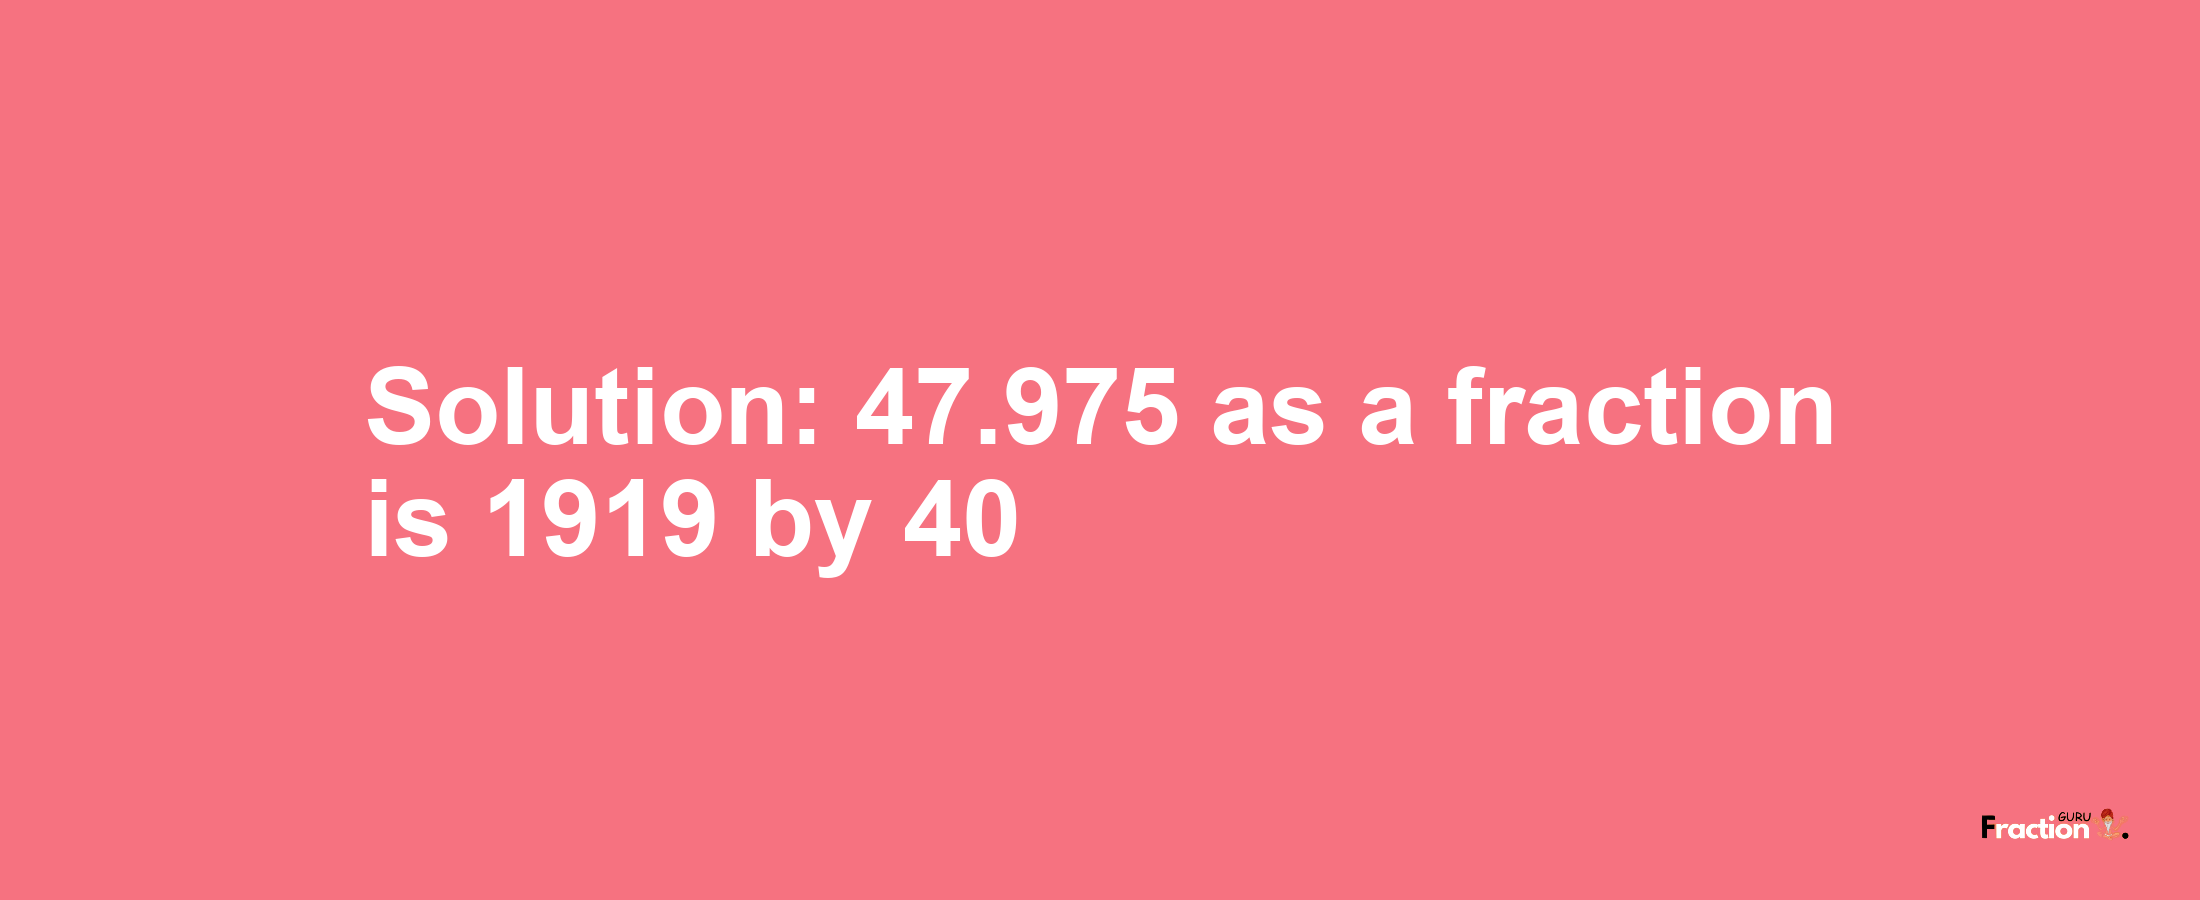 Solution:47.975 as a fraction is 1919/40